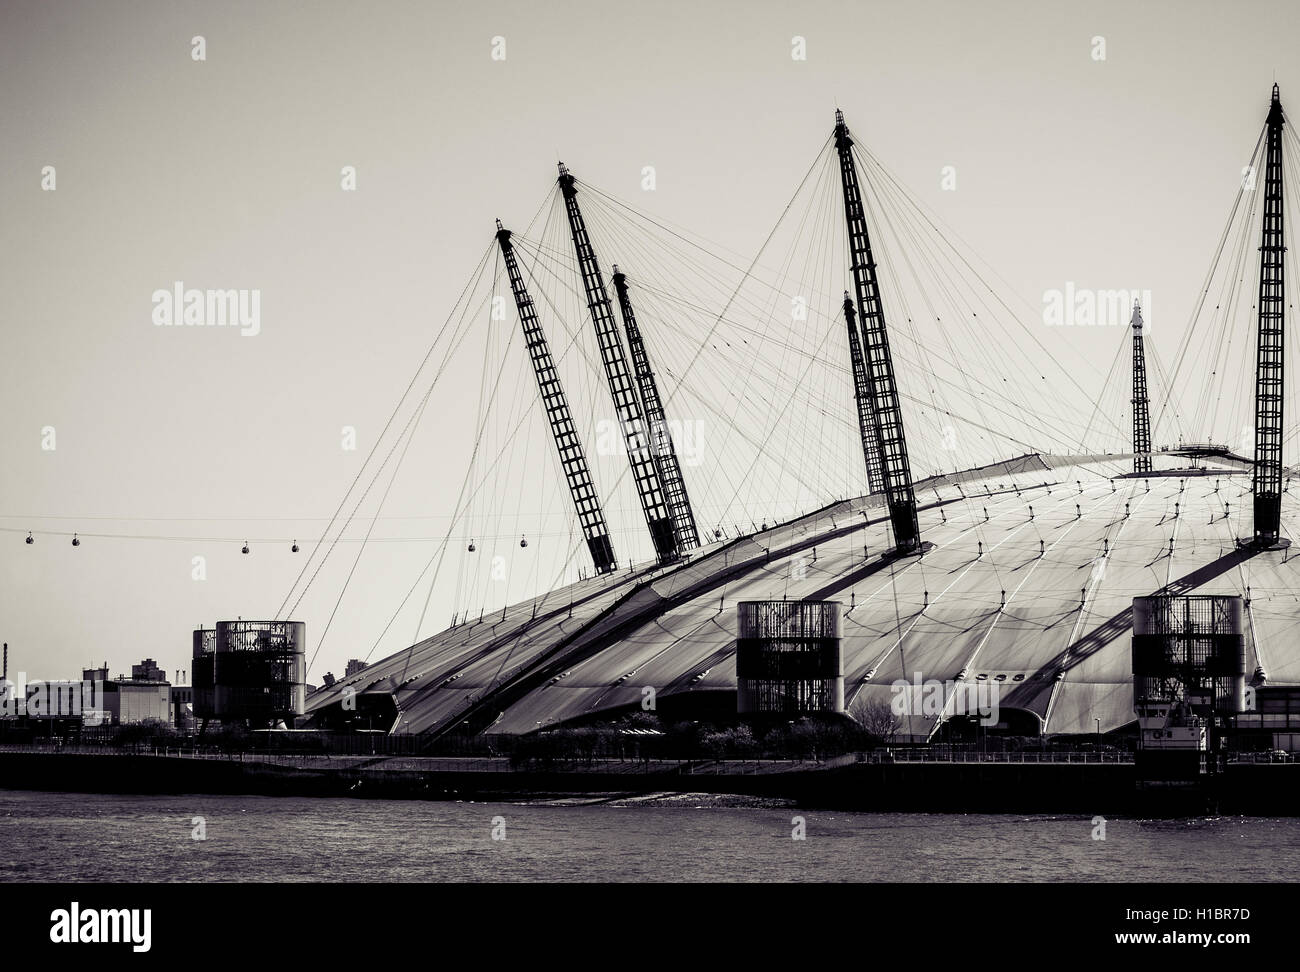 LONDON, UK - MARCH 16, 2014: The Millennium Dome, London's famous entertainment and shopping arena. Processed in black and white Stock Photo